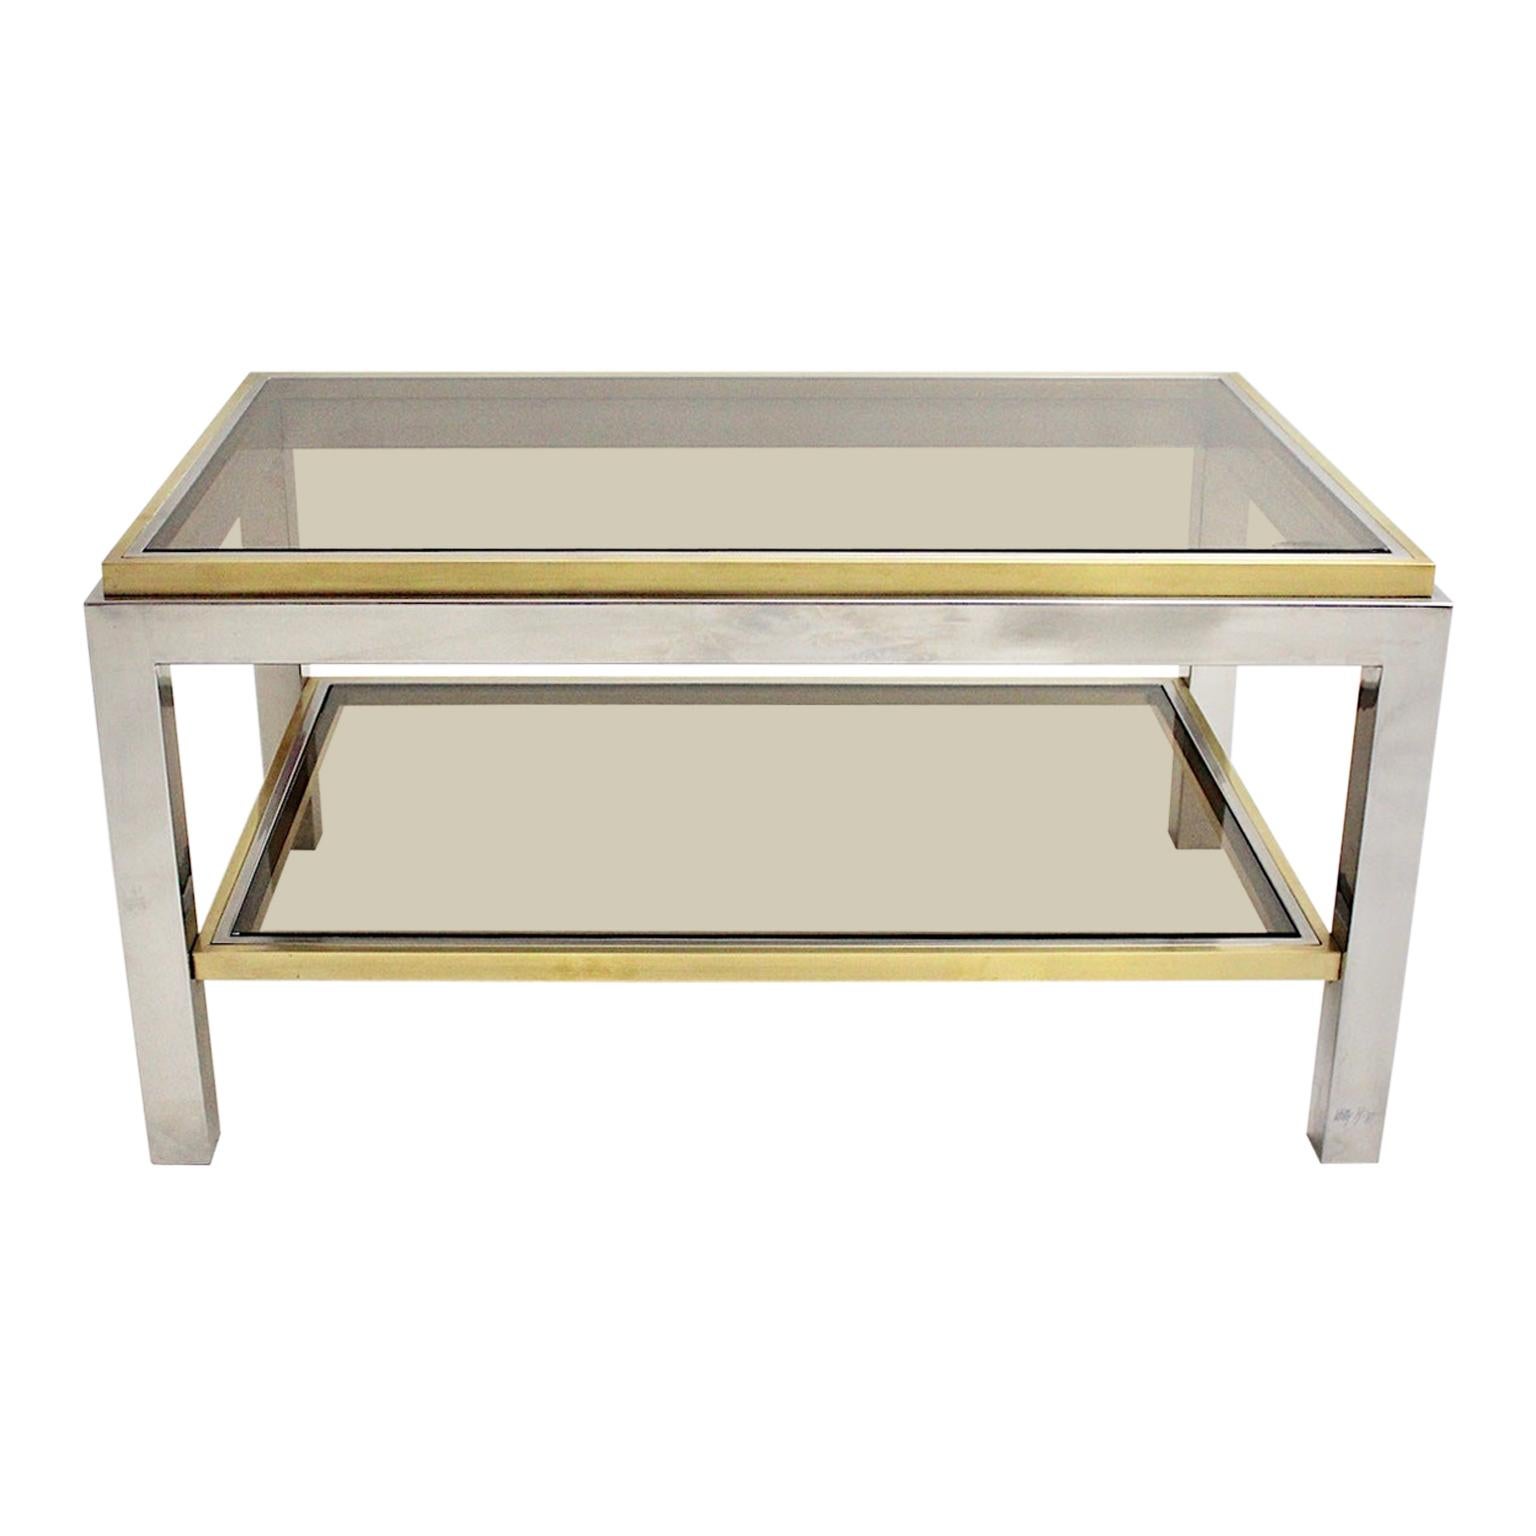 Mid-Century Modern Brass Chrome Coffee Table by Willy Rizzo Signed 1970s Italy